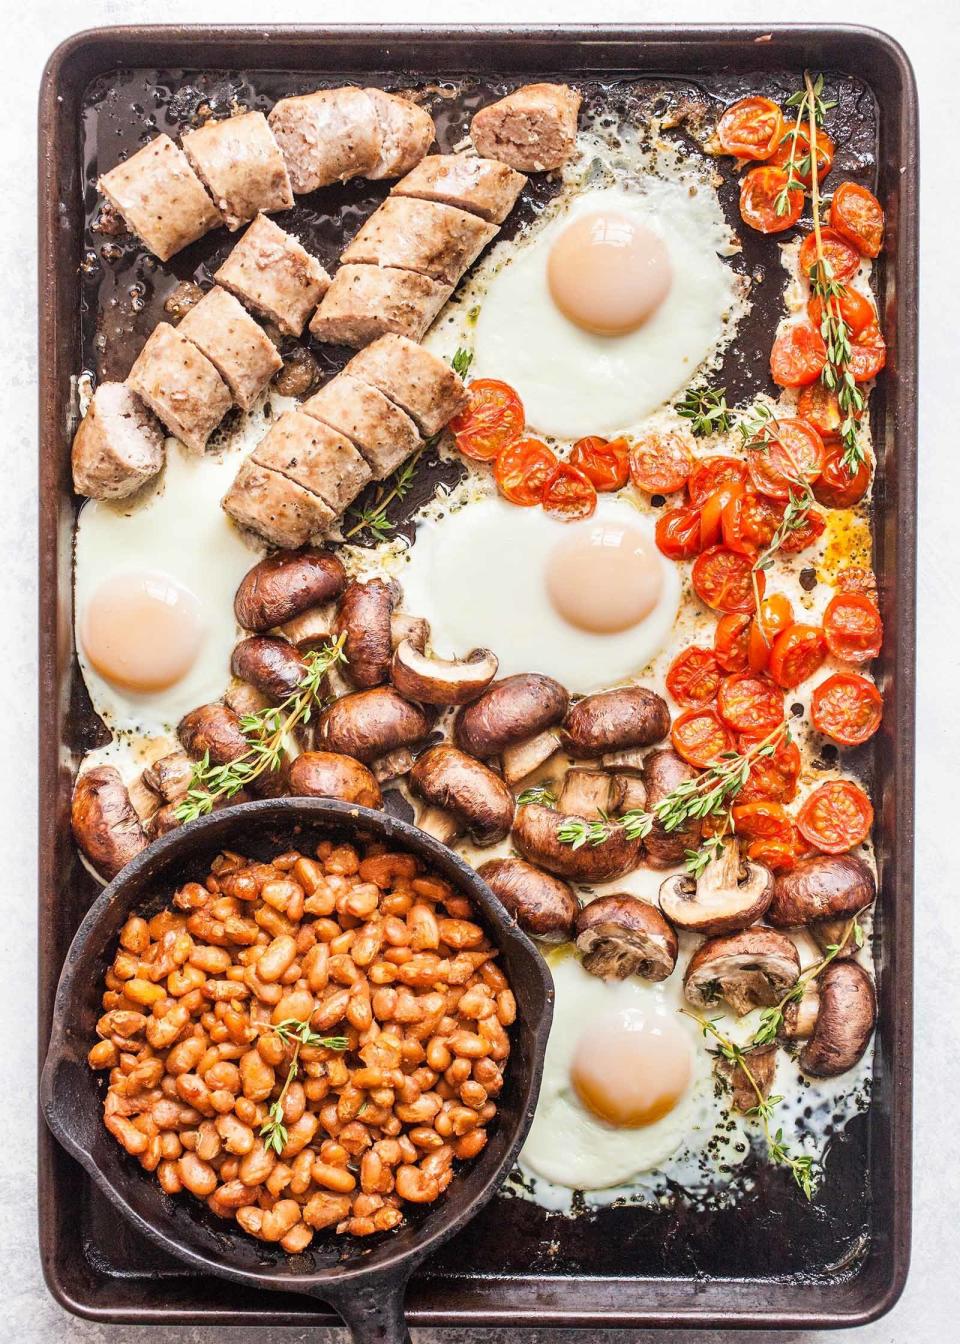 <strong>Get the <a href="https://www.simplyrecipes.com/recipes/sheet_pan_english_breakfast/" target="_blank">Sheet Pan English Breakfast </a>recipe from Macheesmo for Simply Recipes</strong>